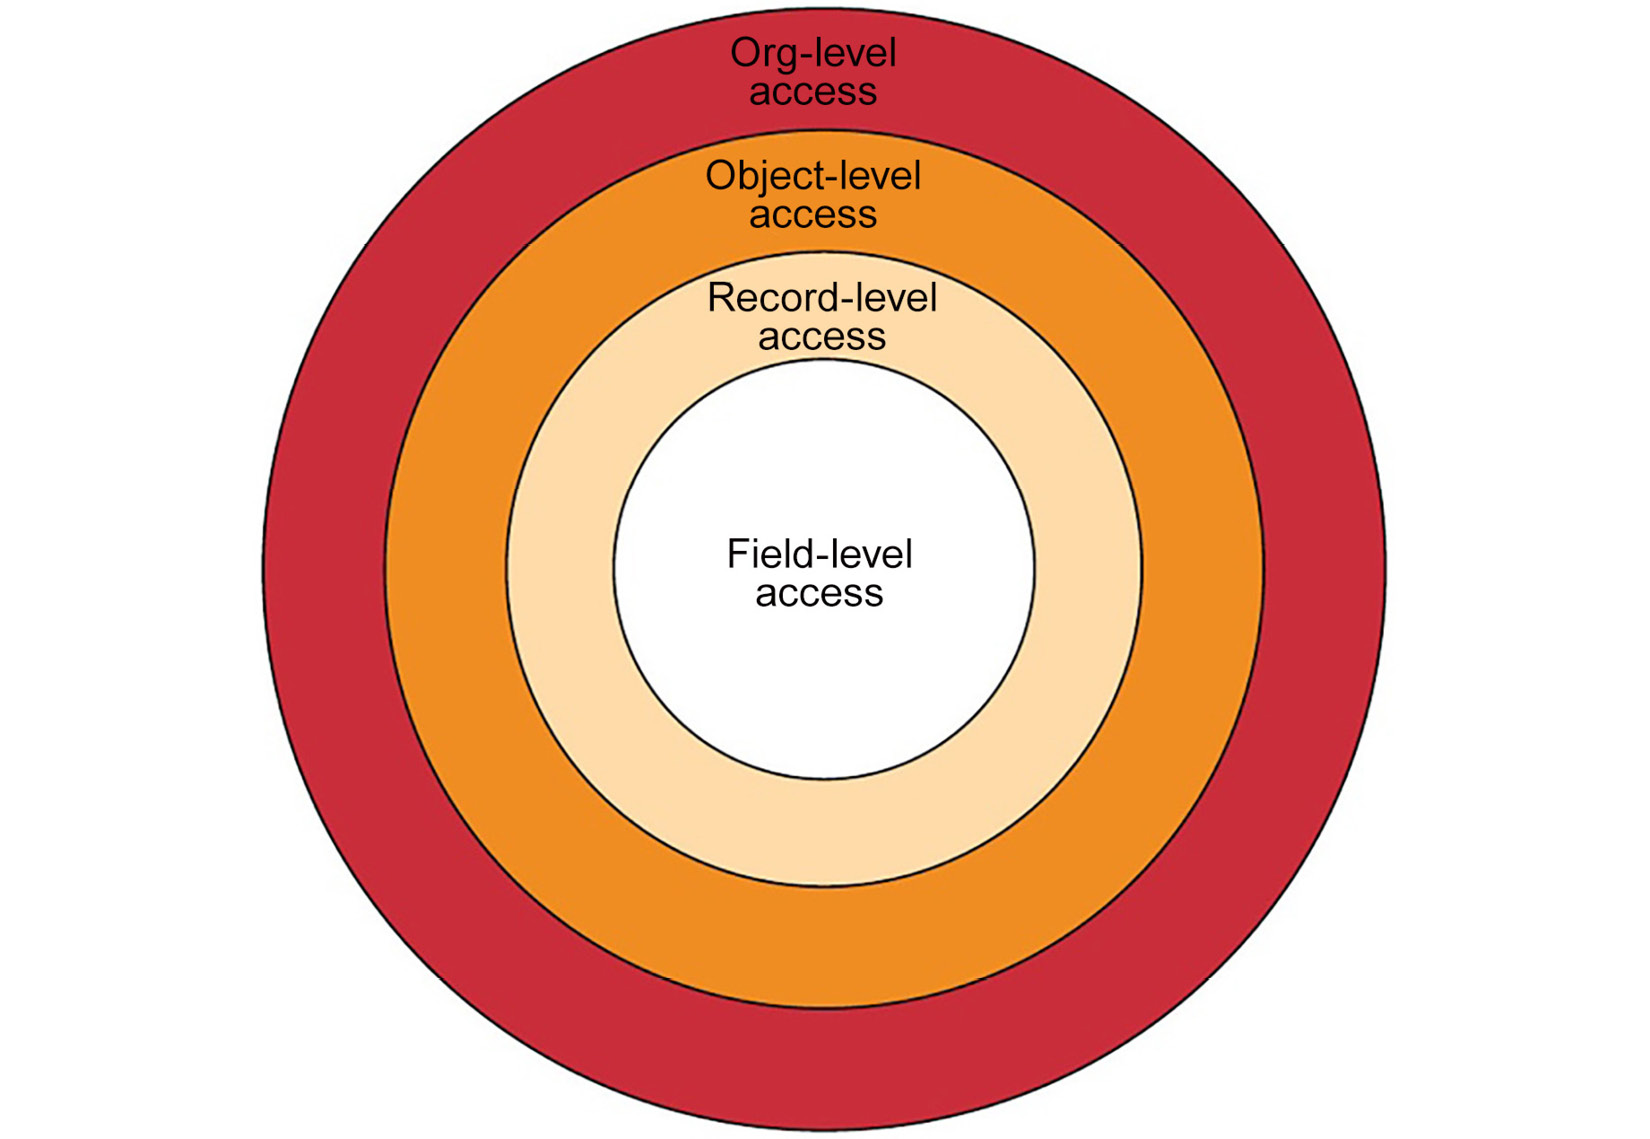 This diagram lists the different data access control levels. The core circle has ‘Field-level access’, followed by ‘Record-level access’, ‘object-level access’, and ‘Org-level access’ as concentric circles.